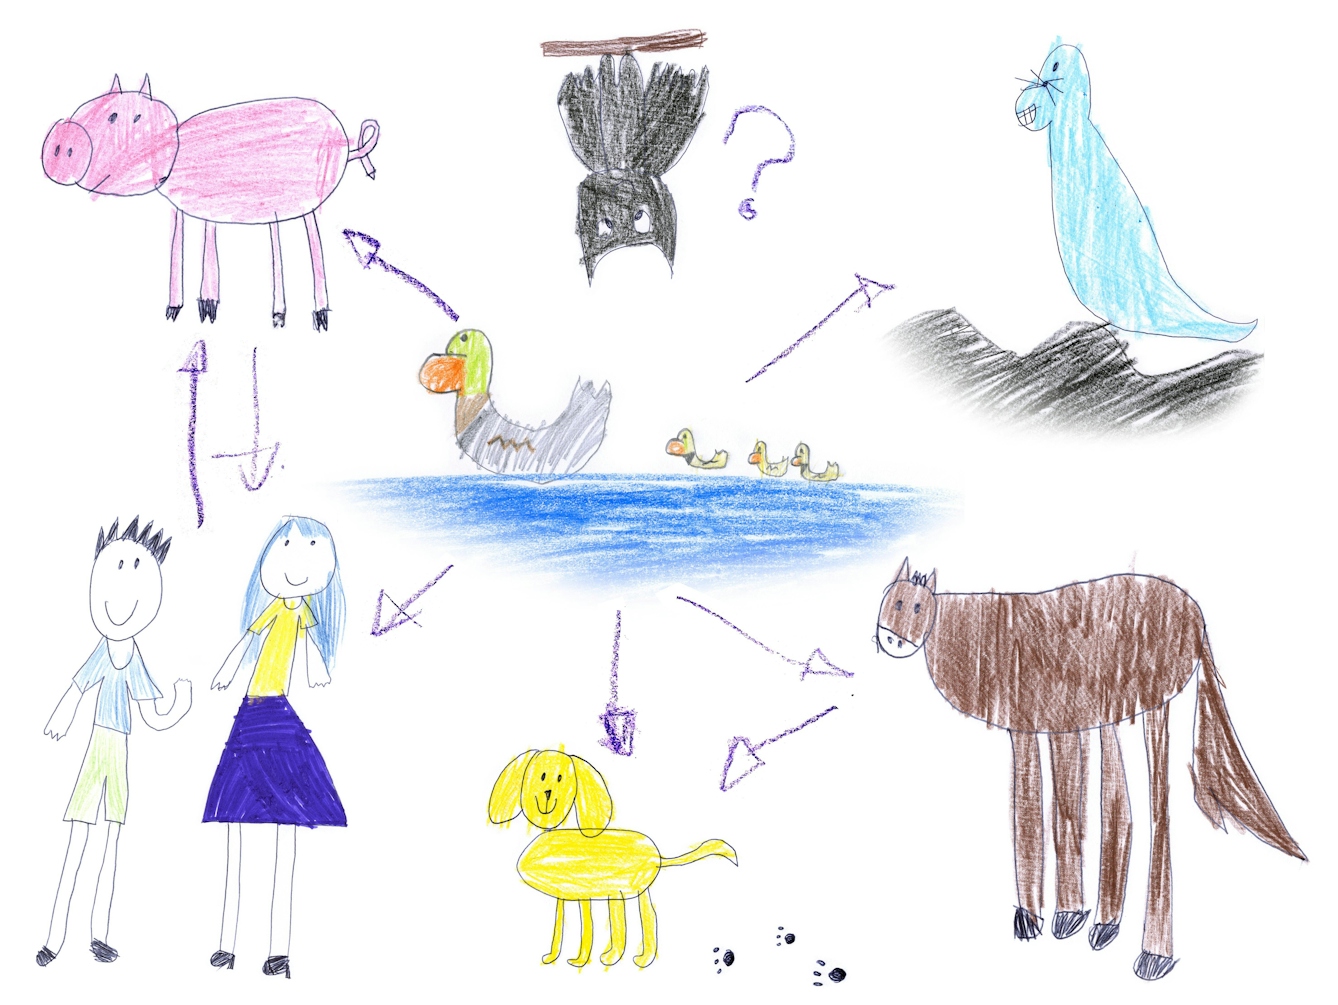 A colour pencil sketch showing the ecology of influenza viruses as they circulate among pigs, bats, harbour seals, horses, dogs and people, with all represented clockwise in circle from top left. A family of ducks are pictured at the center of the drawing. There are arrows between the animals representing "cross-species jumps".